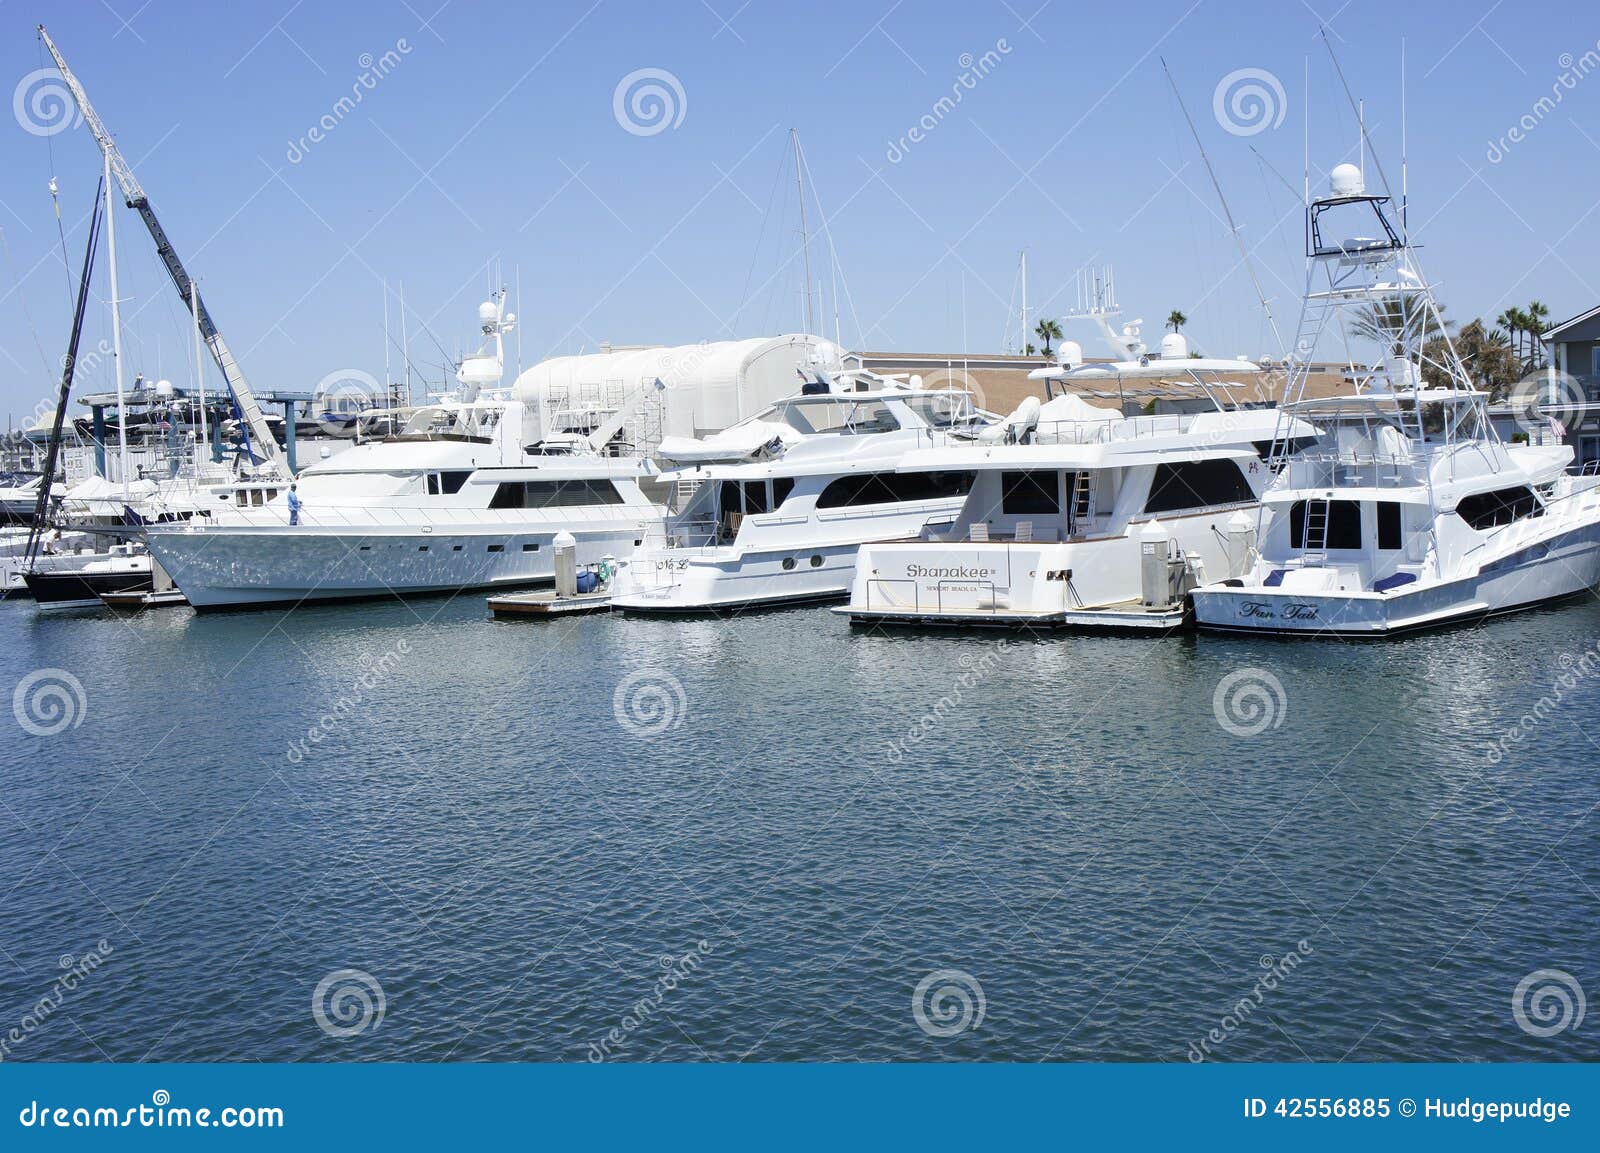 Different Kinds of Speed Boats Editorial Image - Image of clouds ...